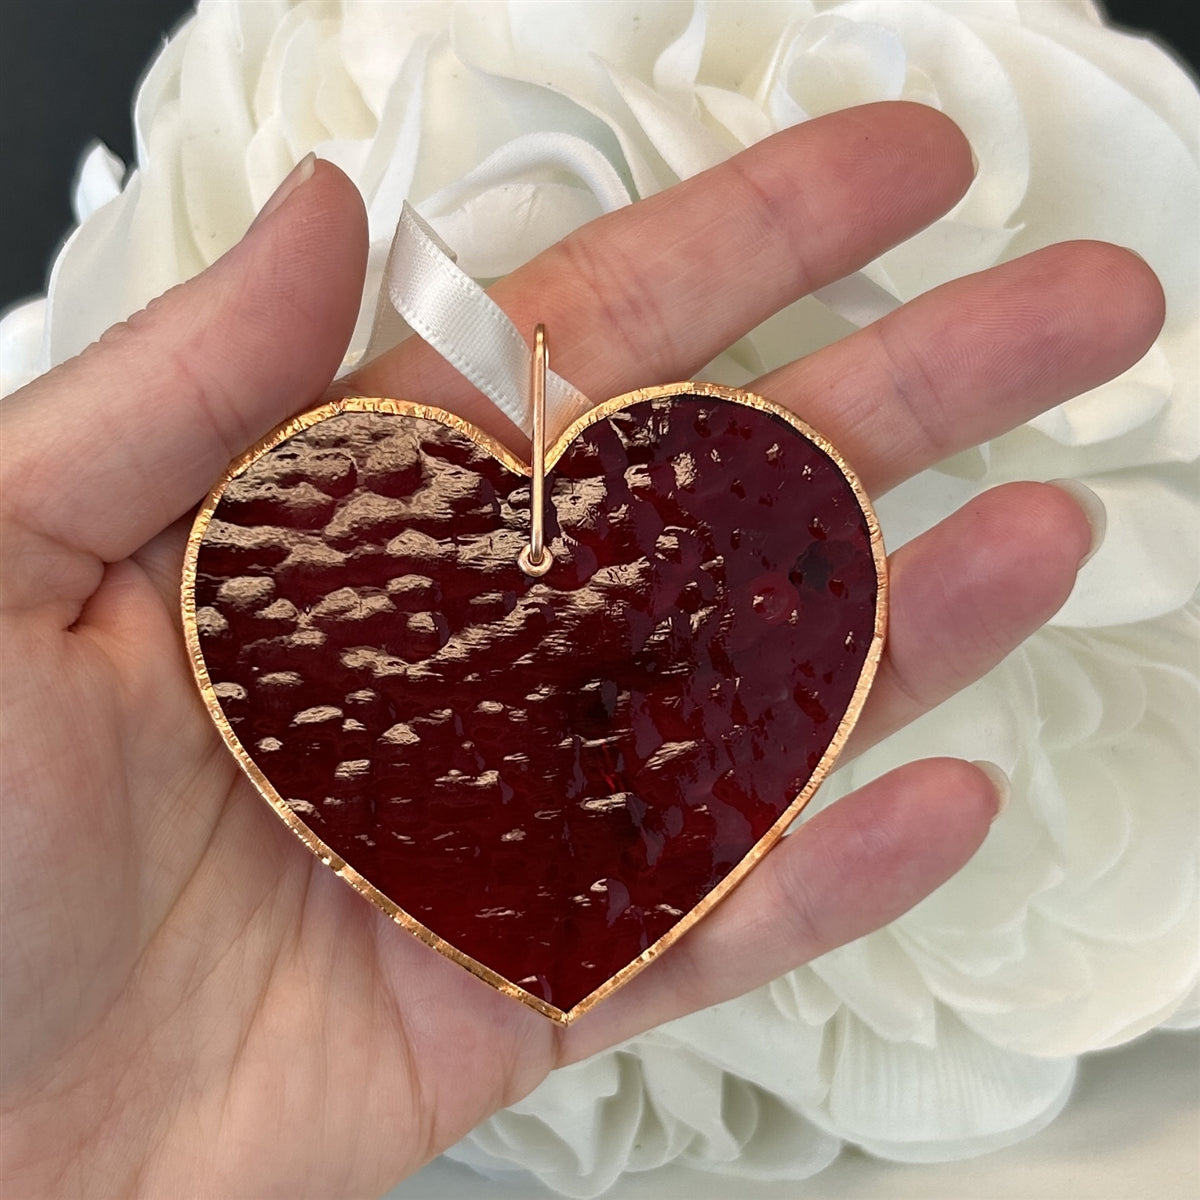 For You Mom on My Wedding Day: Glass Wedding Heart